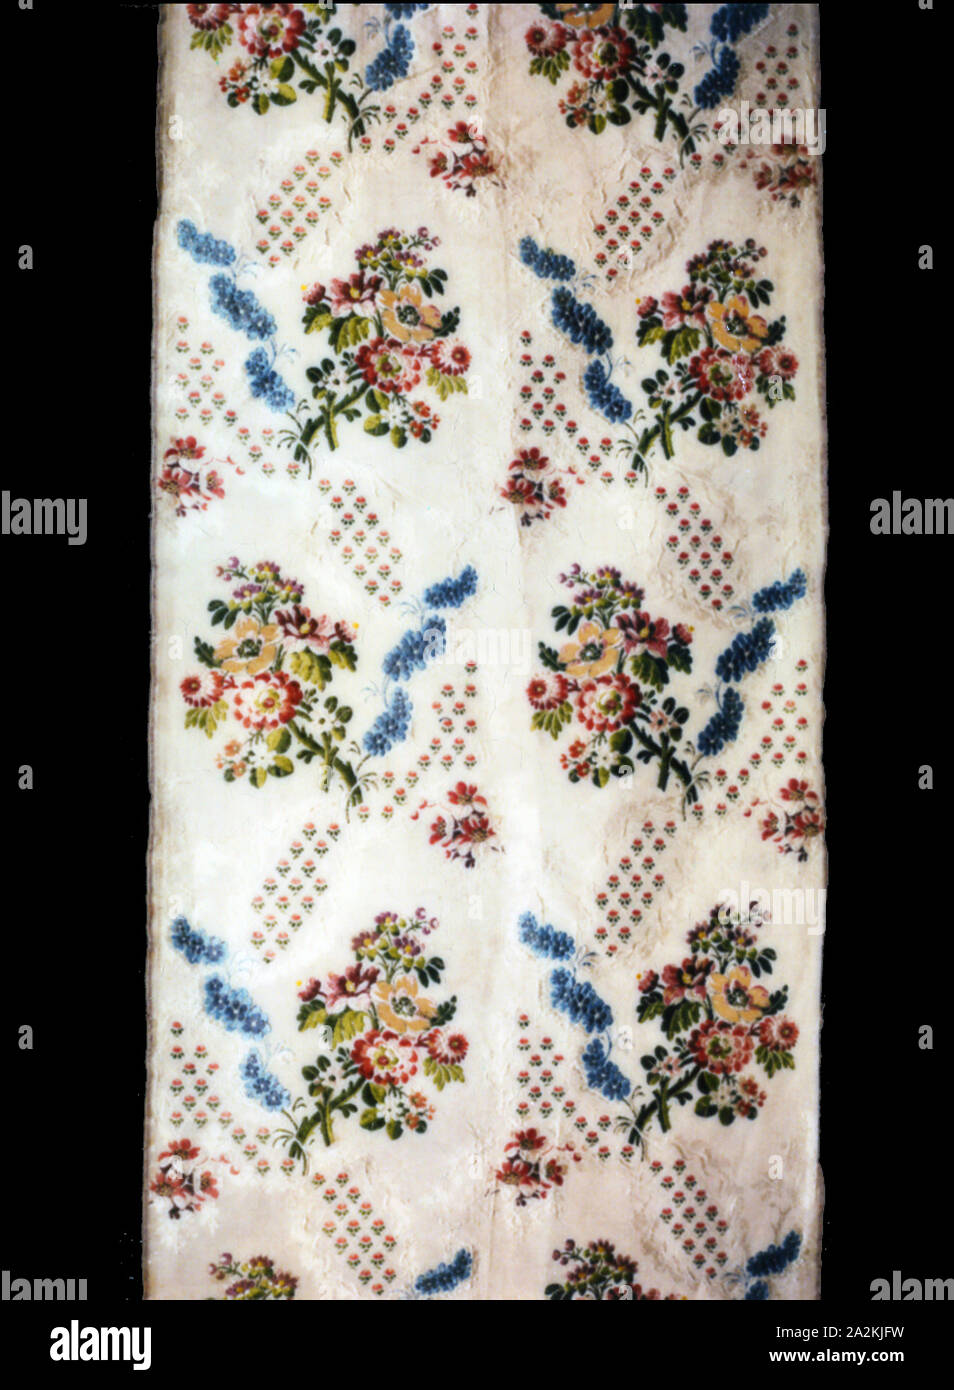 Panel, 1750/75, Germany or Netherlands, Germany, Silk, plain weave with supplementary patterning and brocading wefts, 181.7 x 48.2 cm (71 1/2 x 19 in Stock Photo